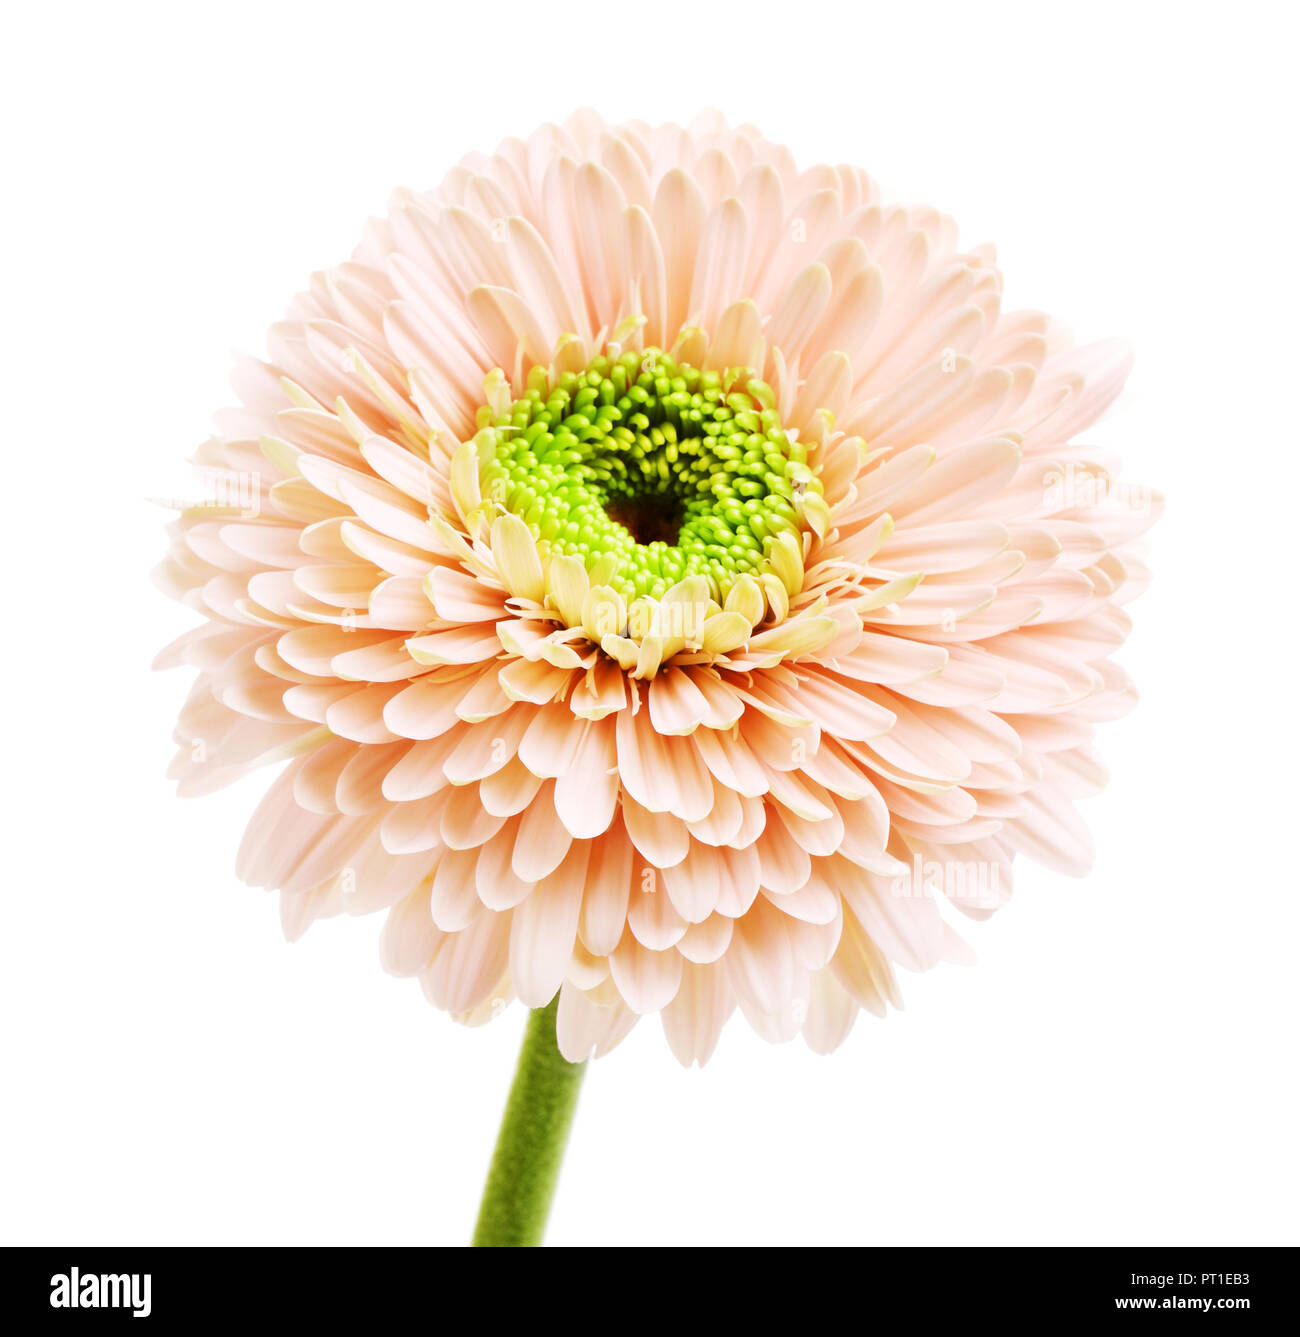 pink gerbera daisy flower, isolated on white background Stock Photo